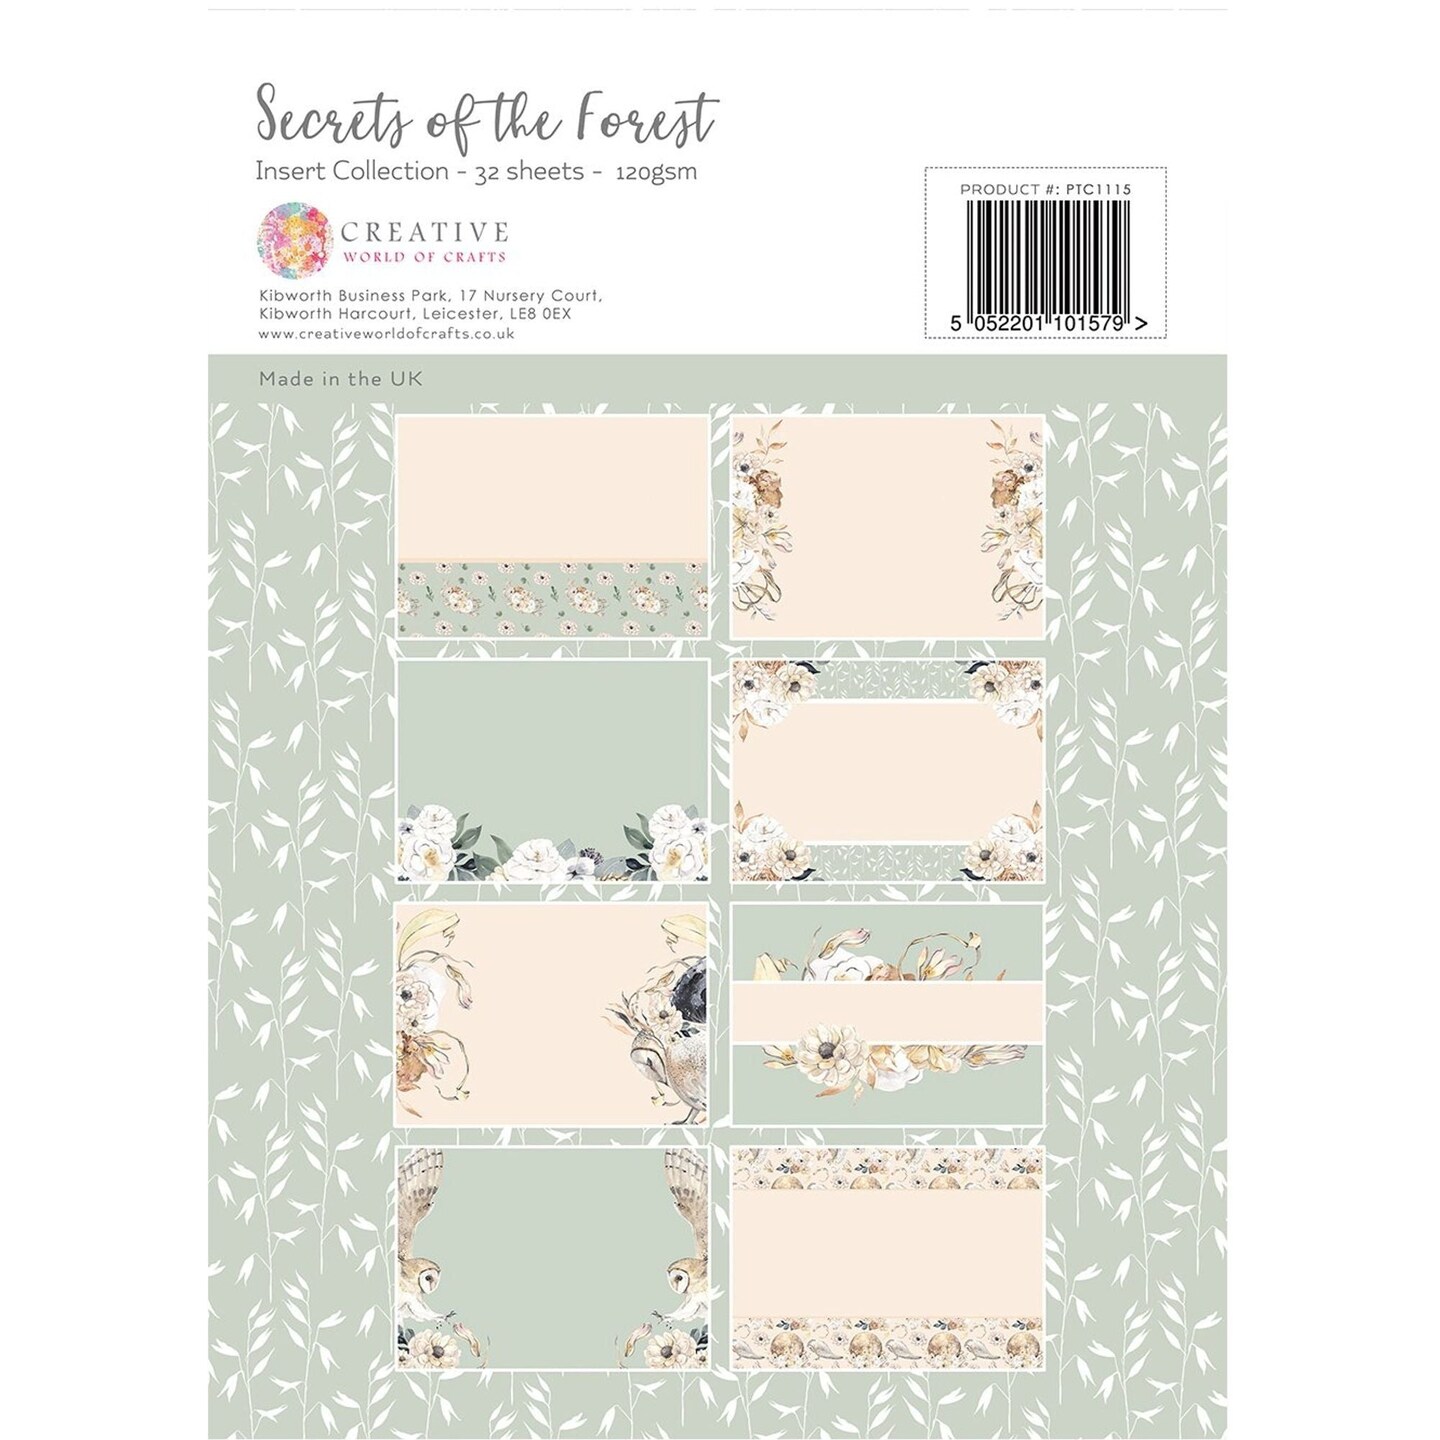 The Paper Tree  Secrets of the Forest A4 Insert Collection